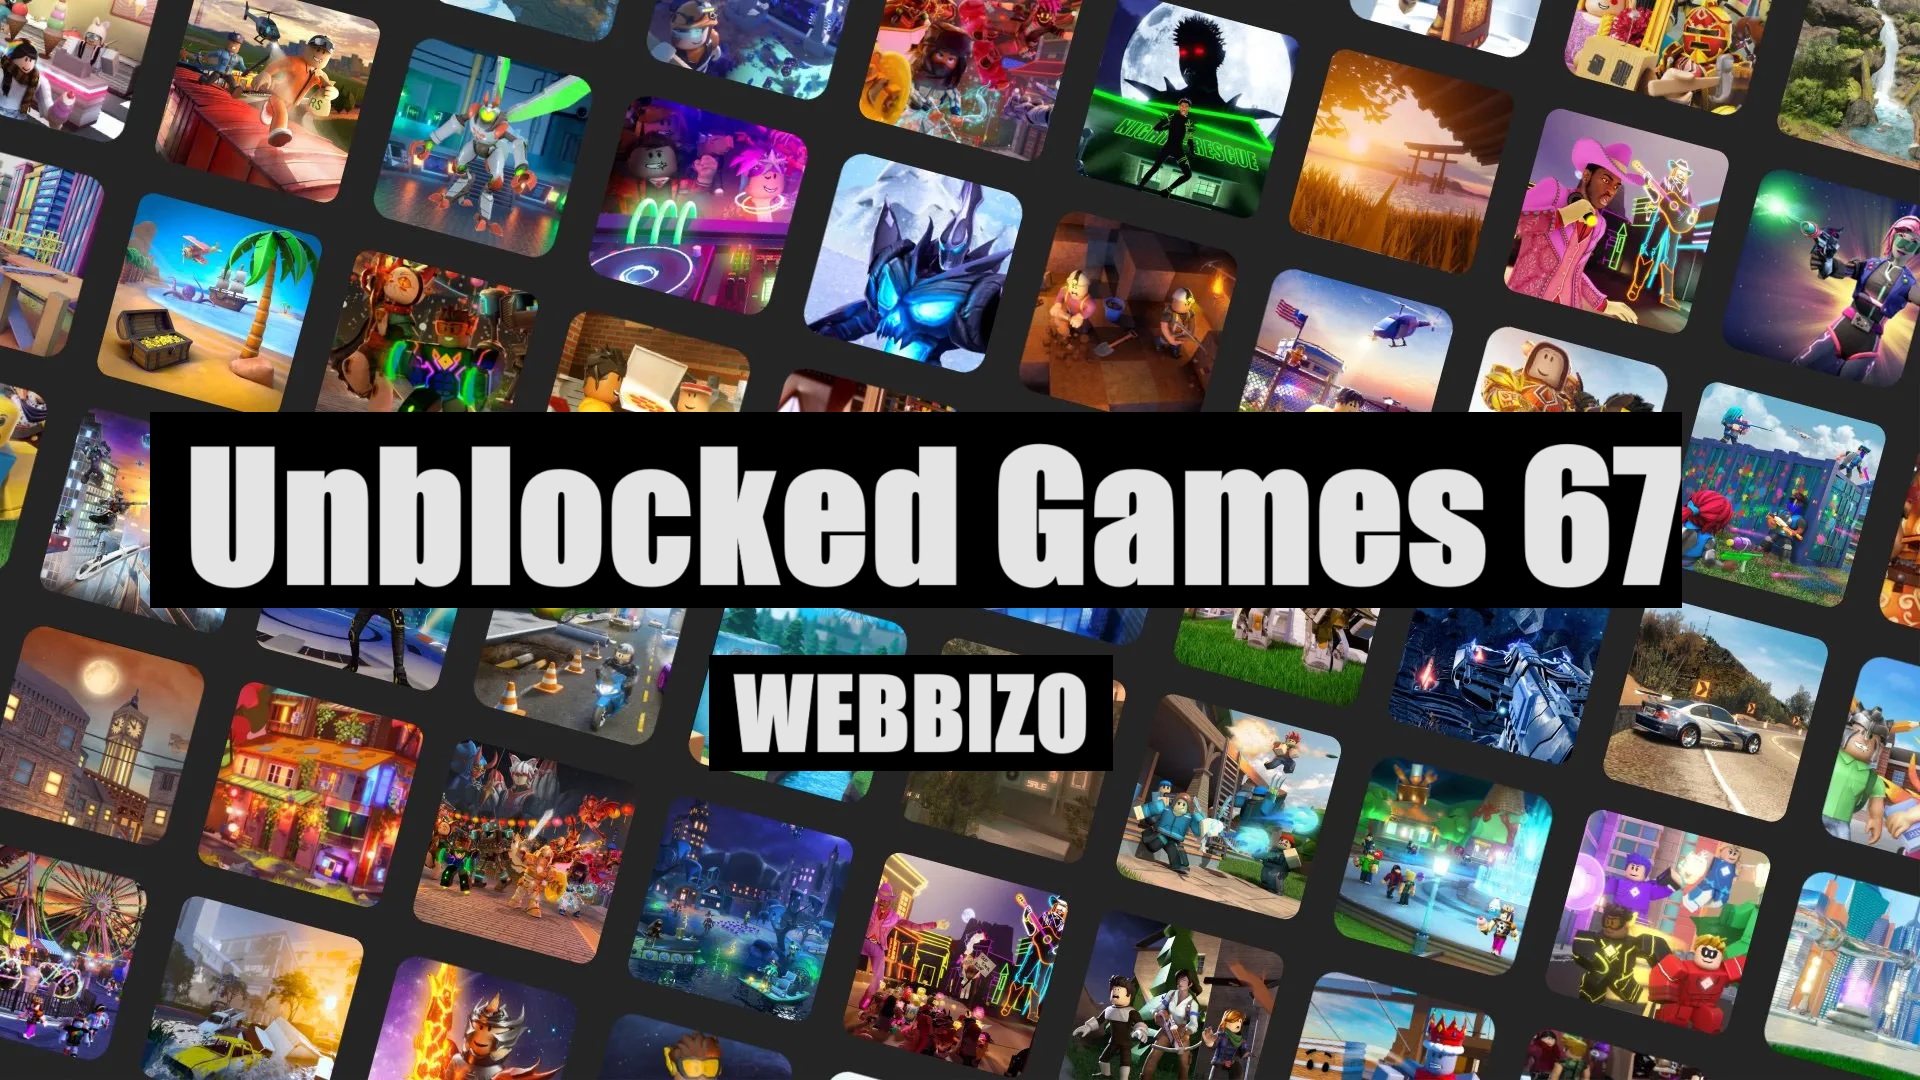 Unblocked Games 67 